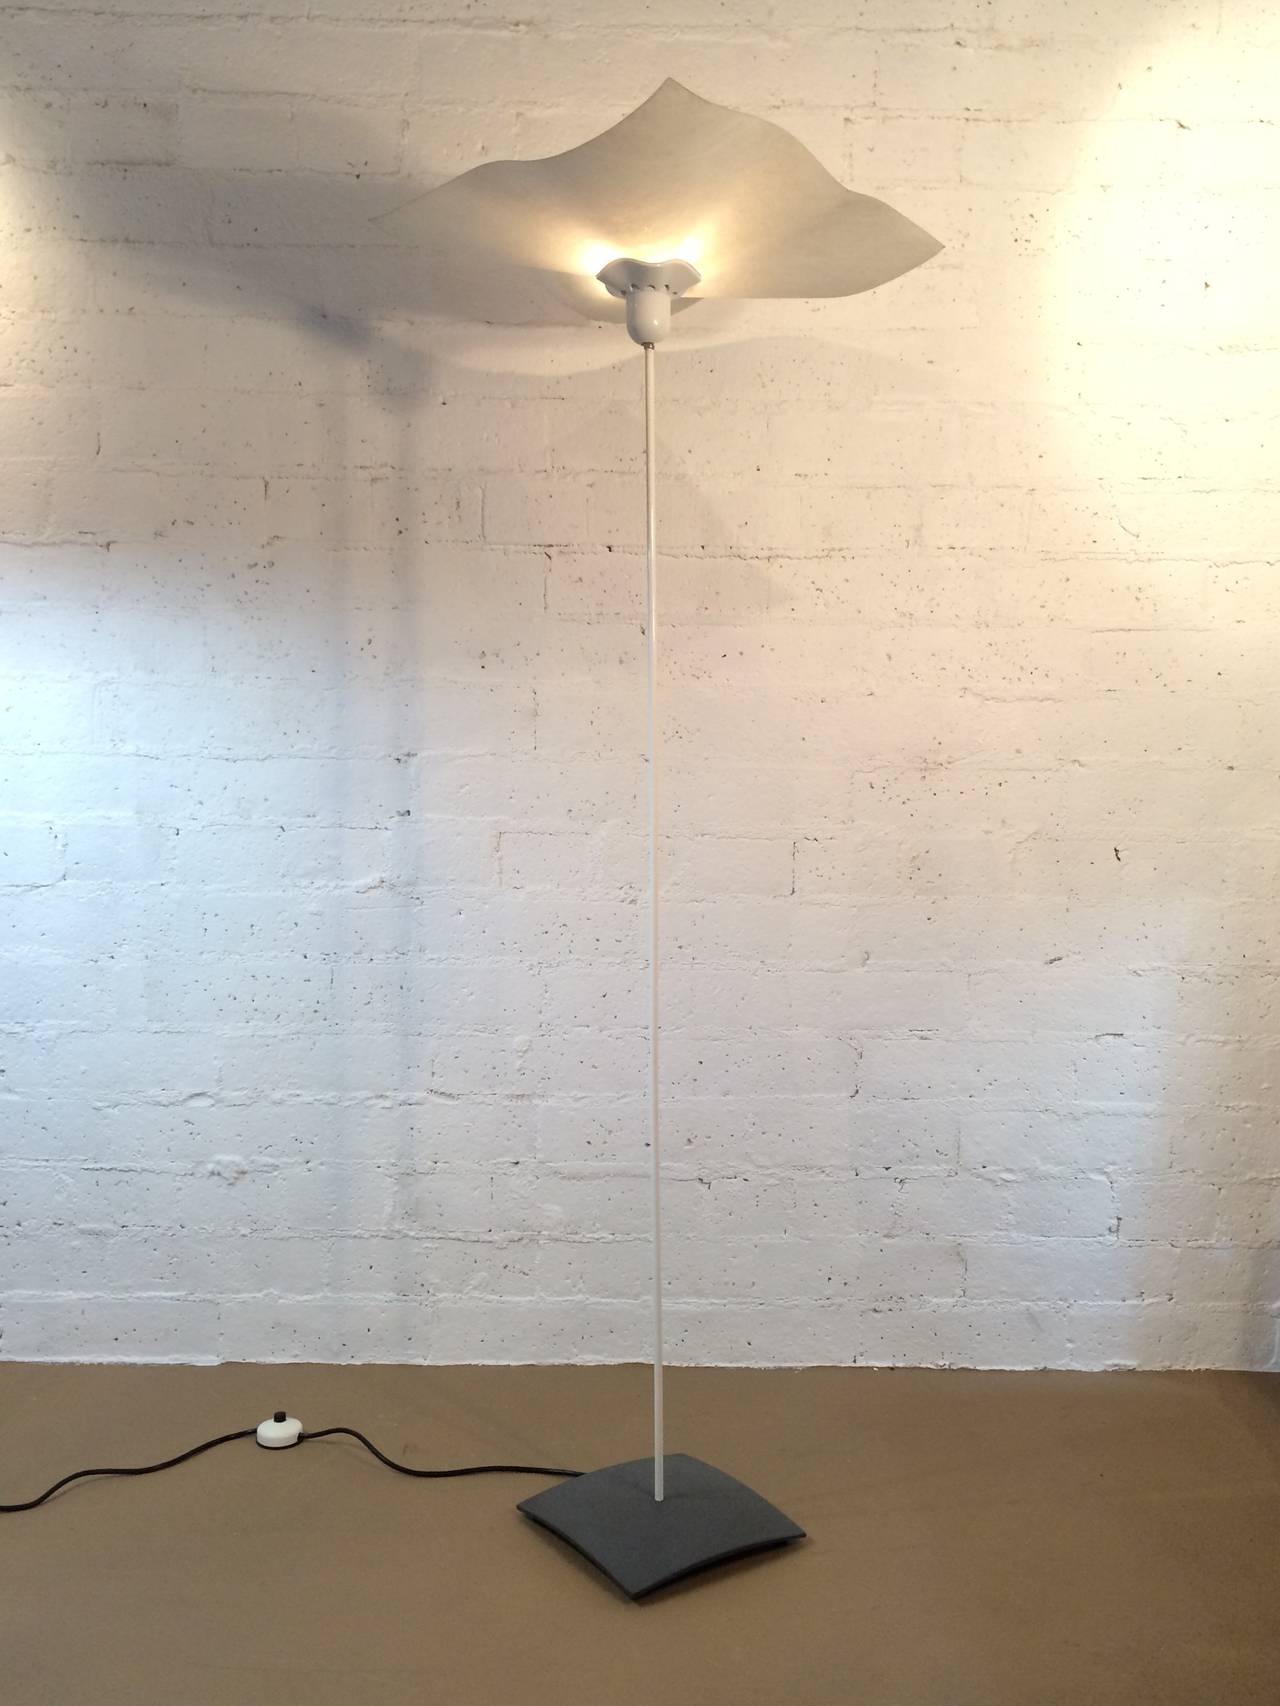 A rare floor lamp from 1974.
This lamp is called the 